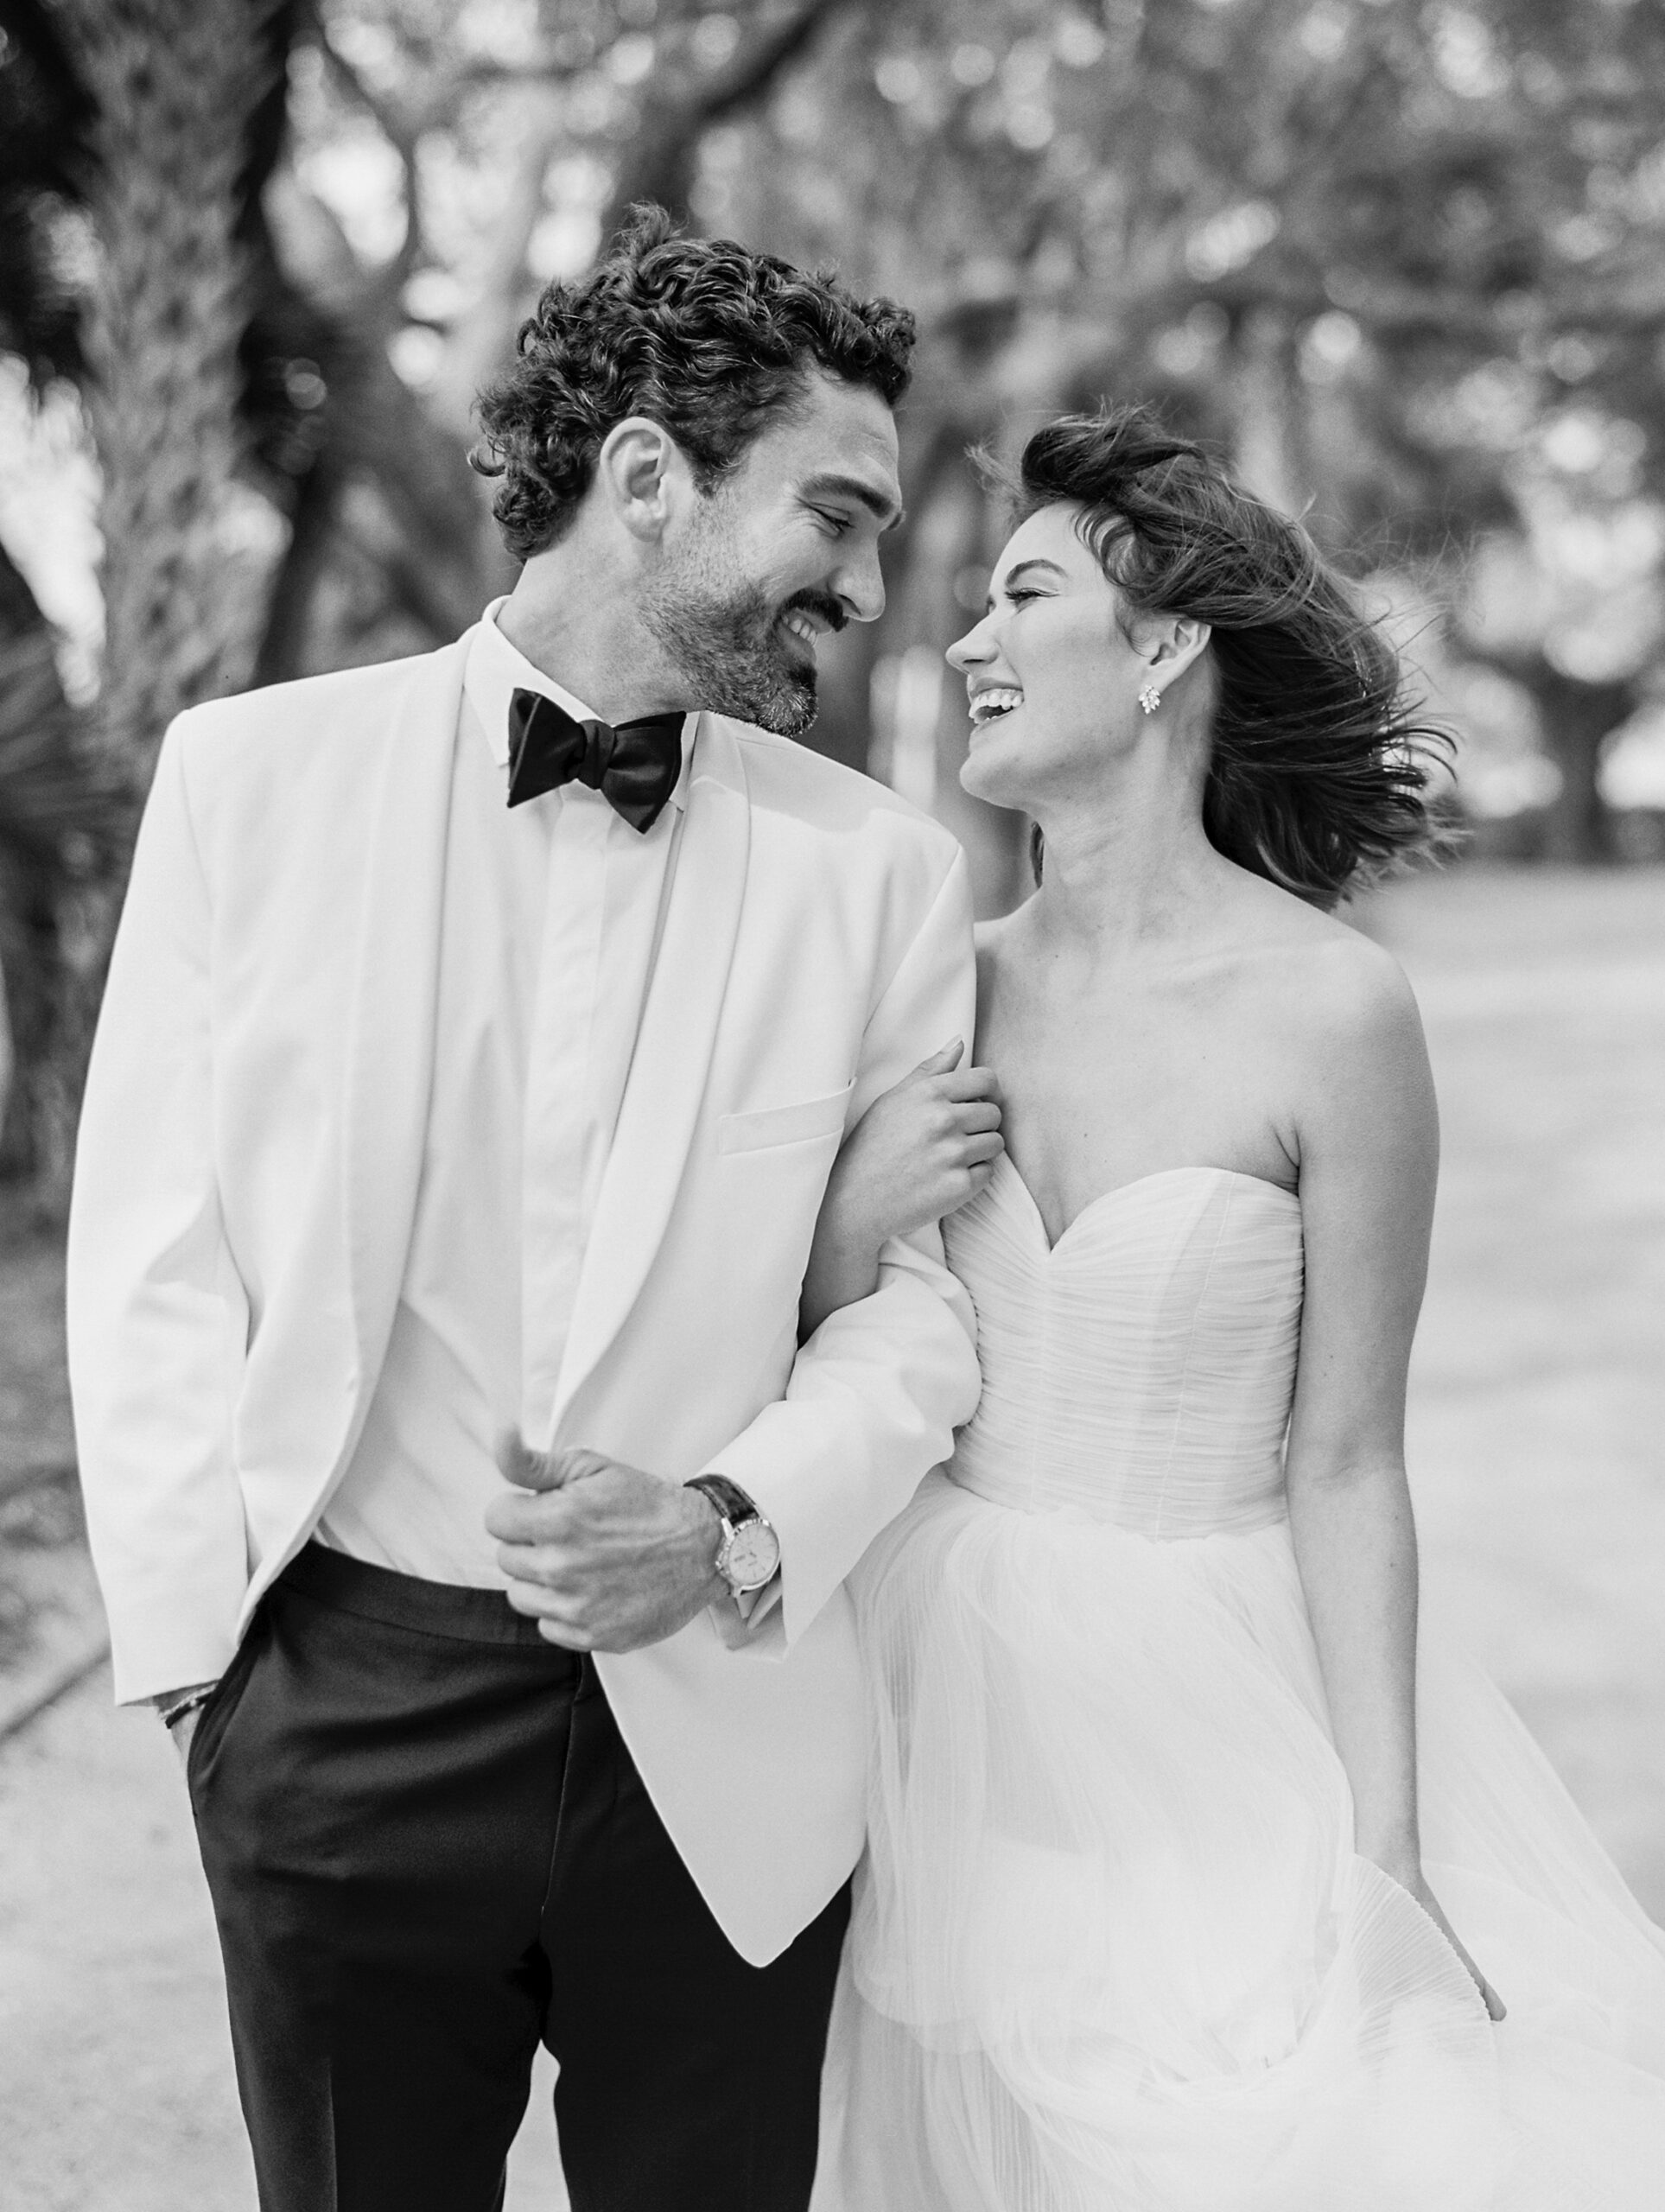 Lowdnes Grove Wedding by destination film wedding photographer Katie Trauffer Photography - bride and groom joyfully walk along palms in black and white